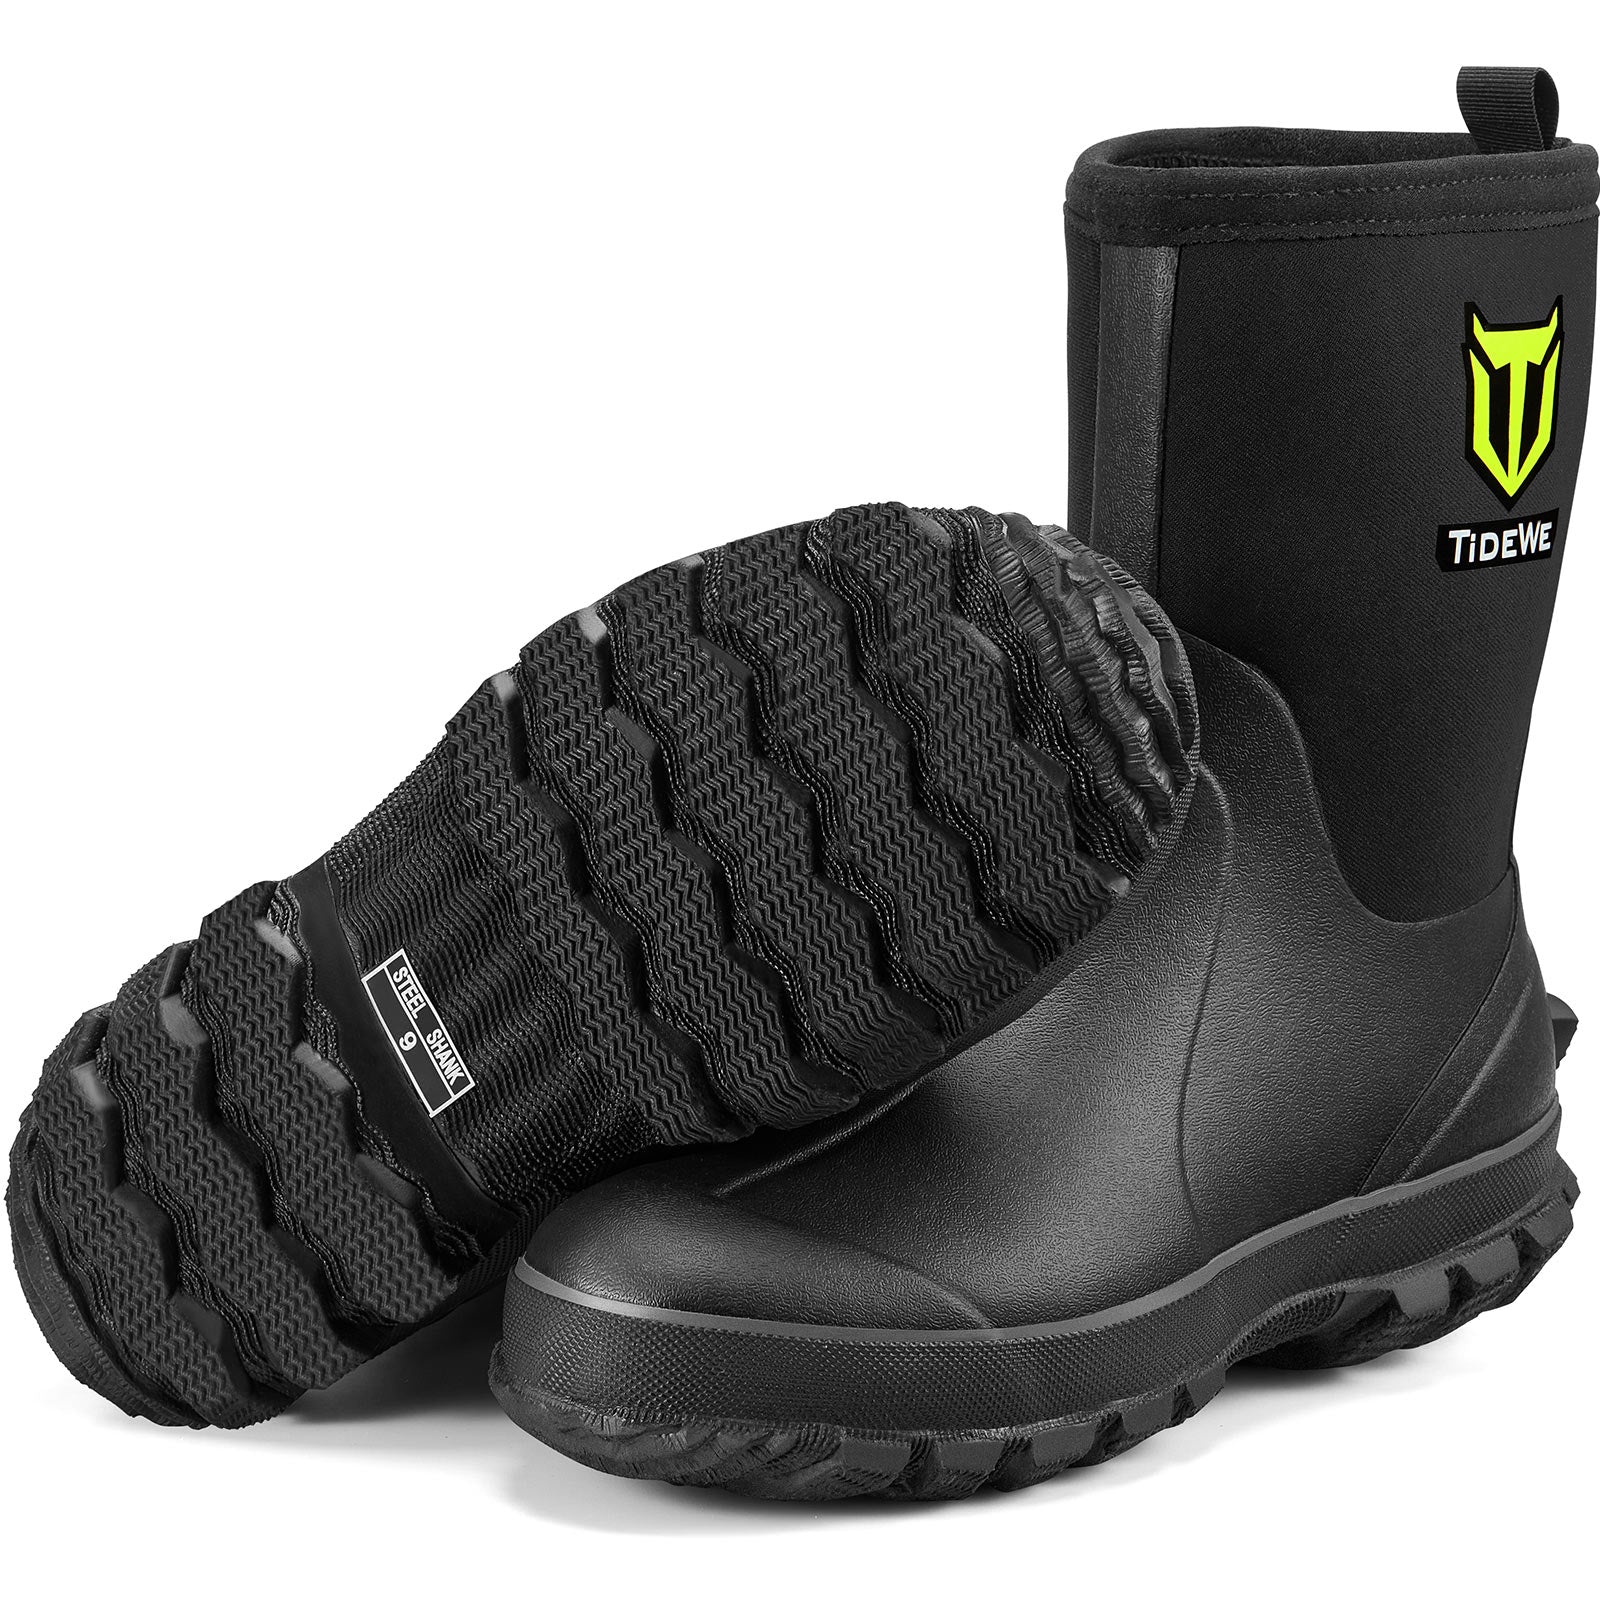 TideWe Rubber Boots for Men, Waterproof Neoprene Insulated Rain Boots, Mid Hunting Boots Outdoor Work Shoes, Black / 5